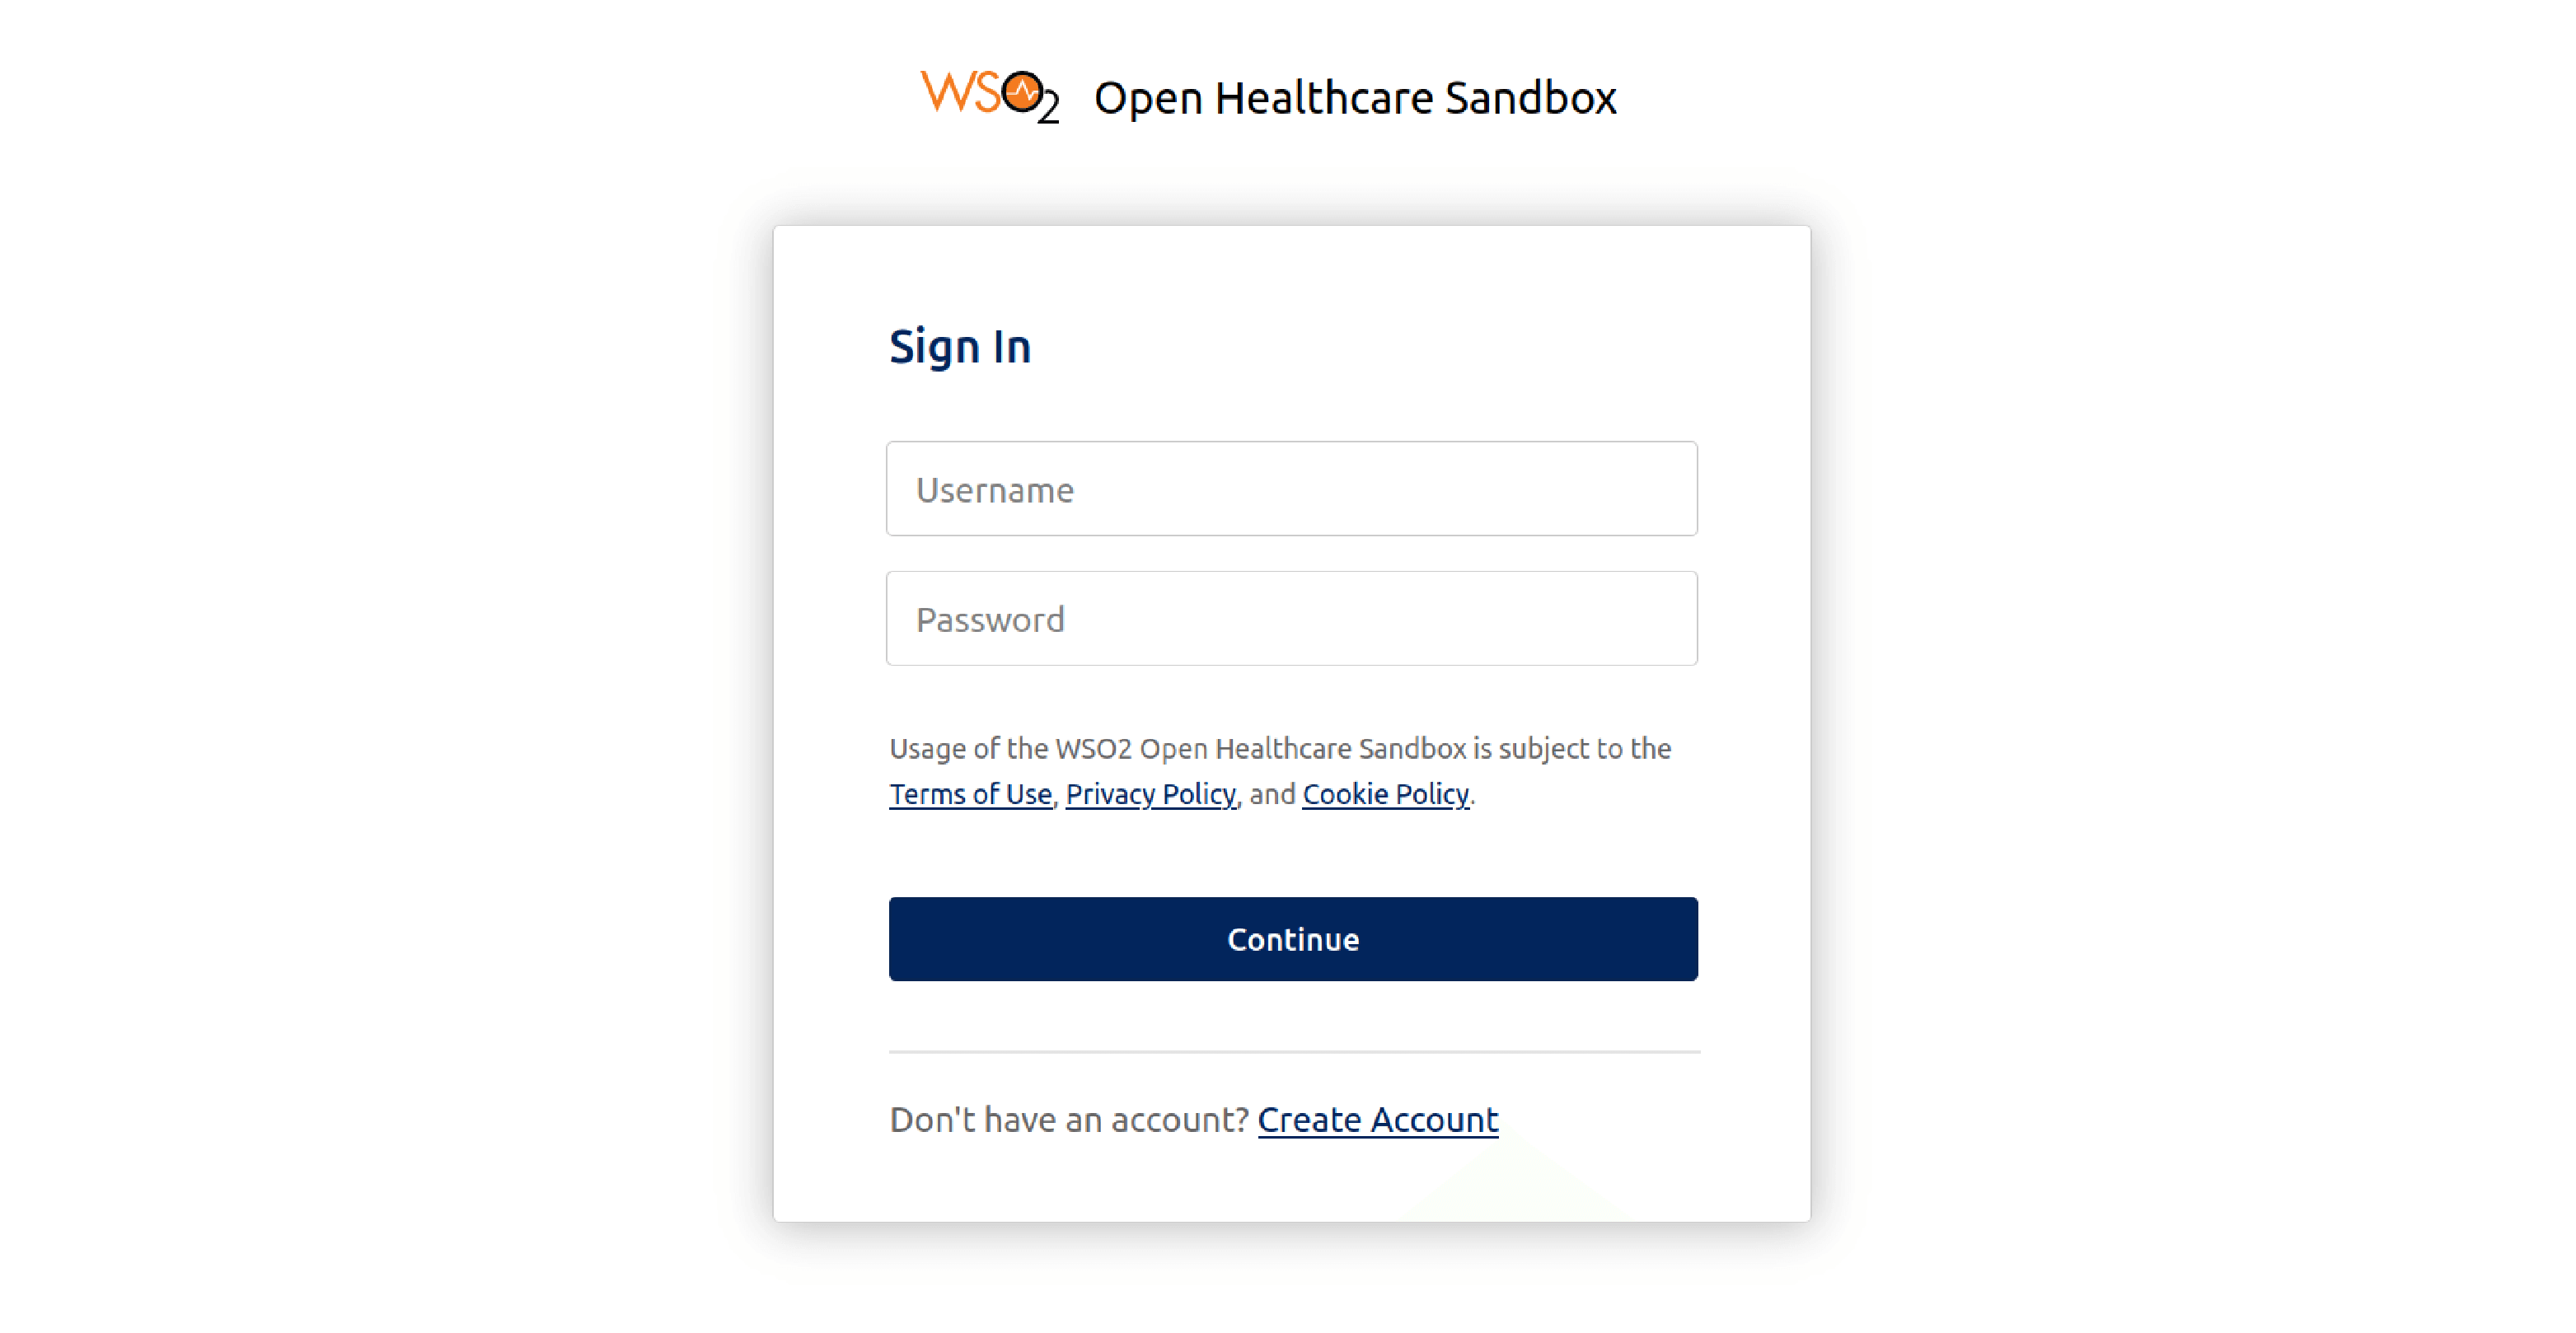 Sign in with the received credentials